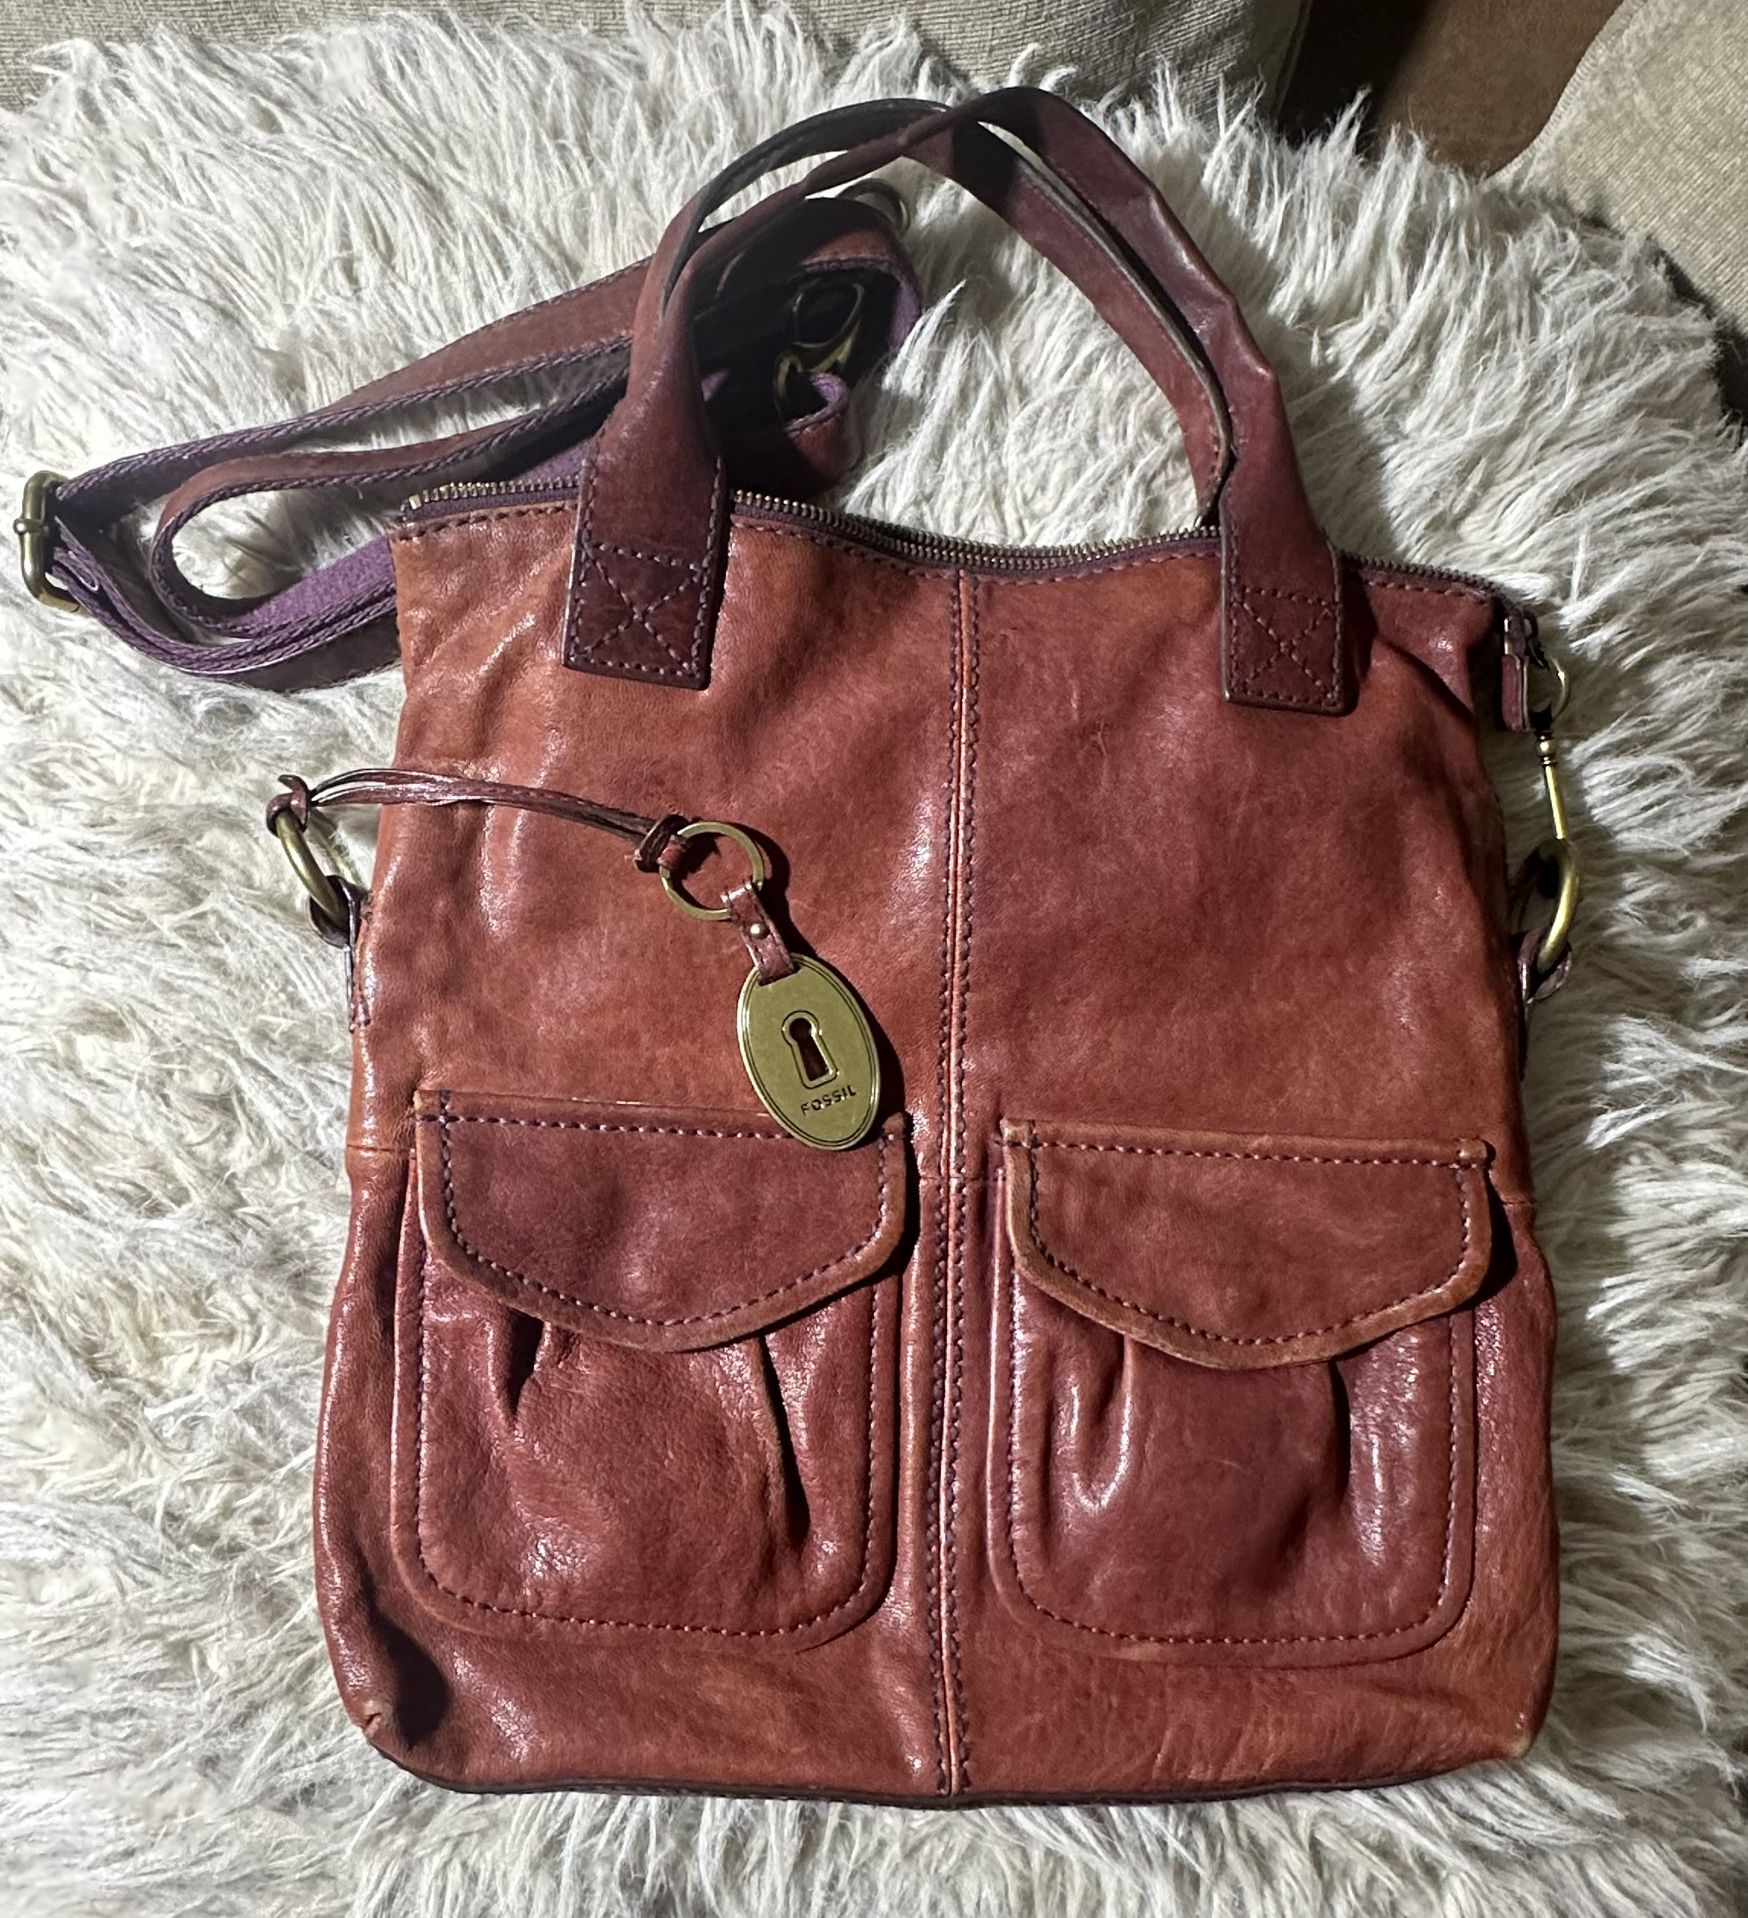 Fossil crossbody purse Red lamb hide leather